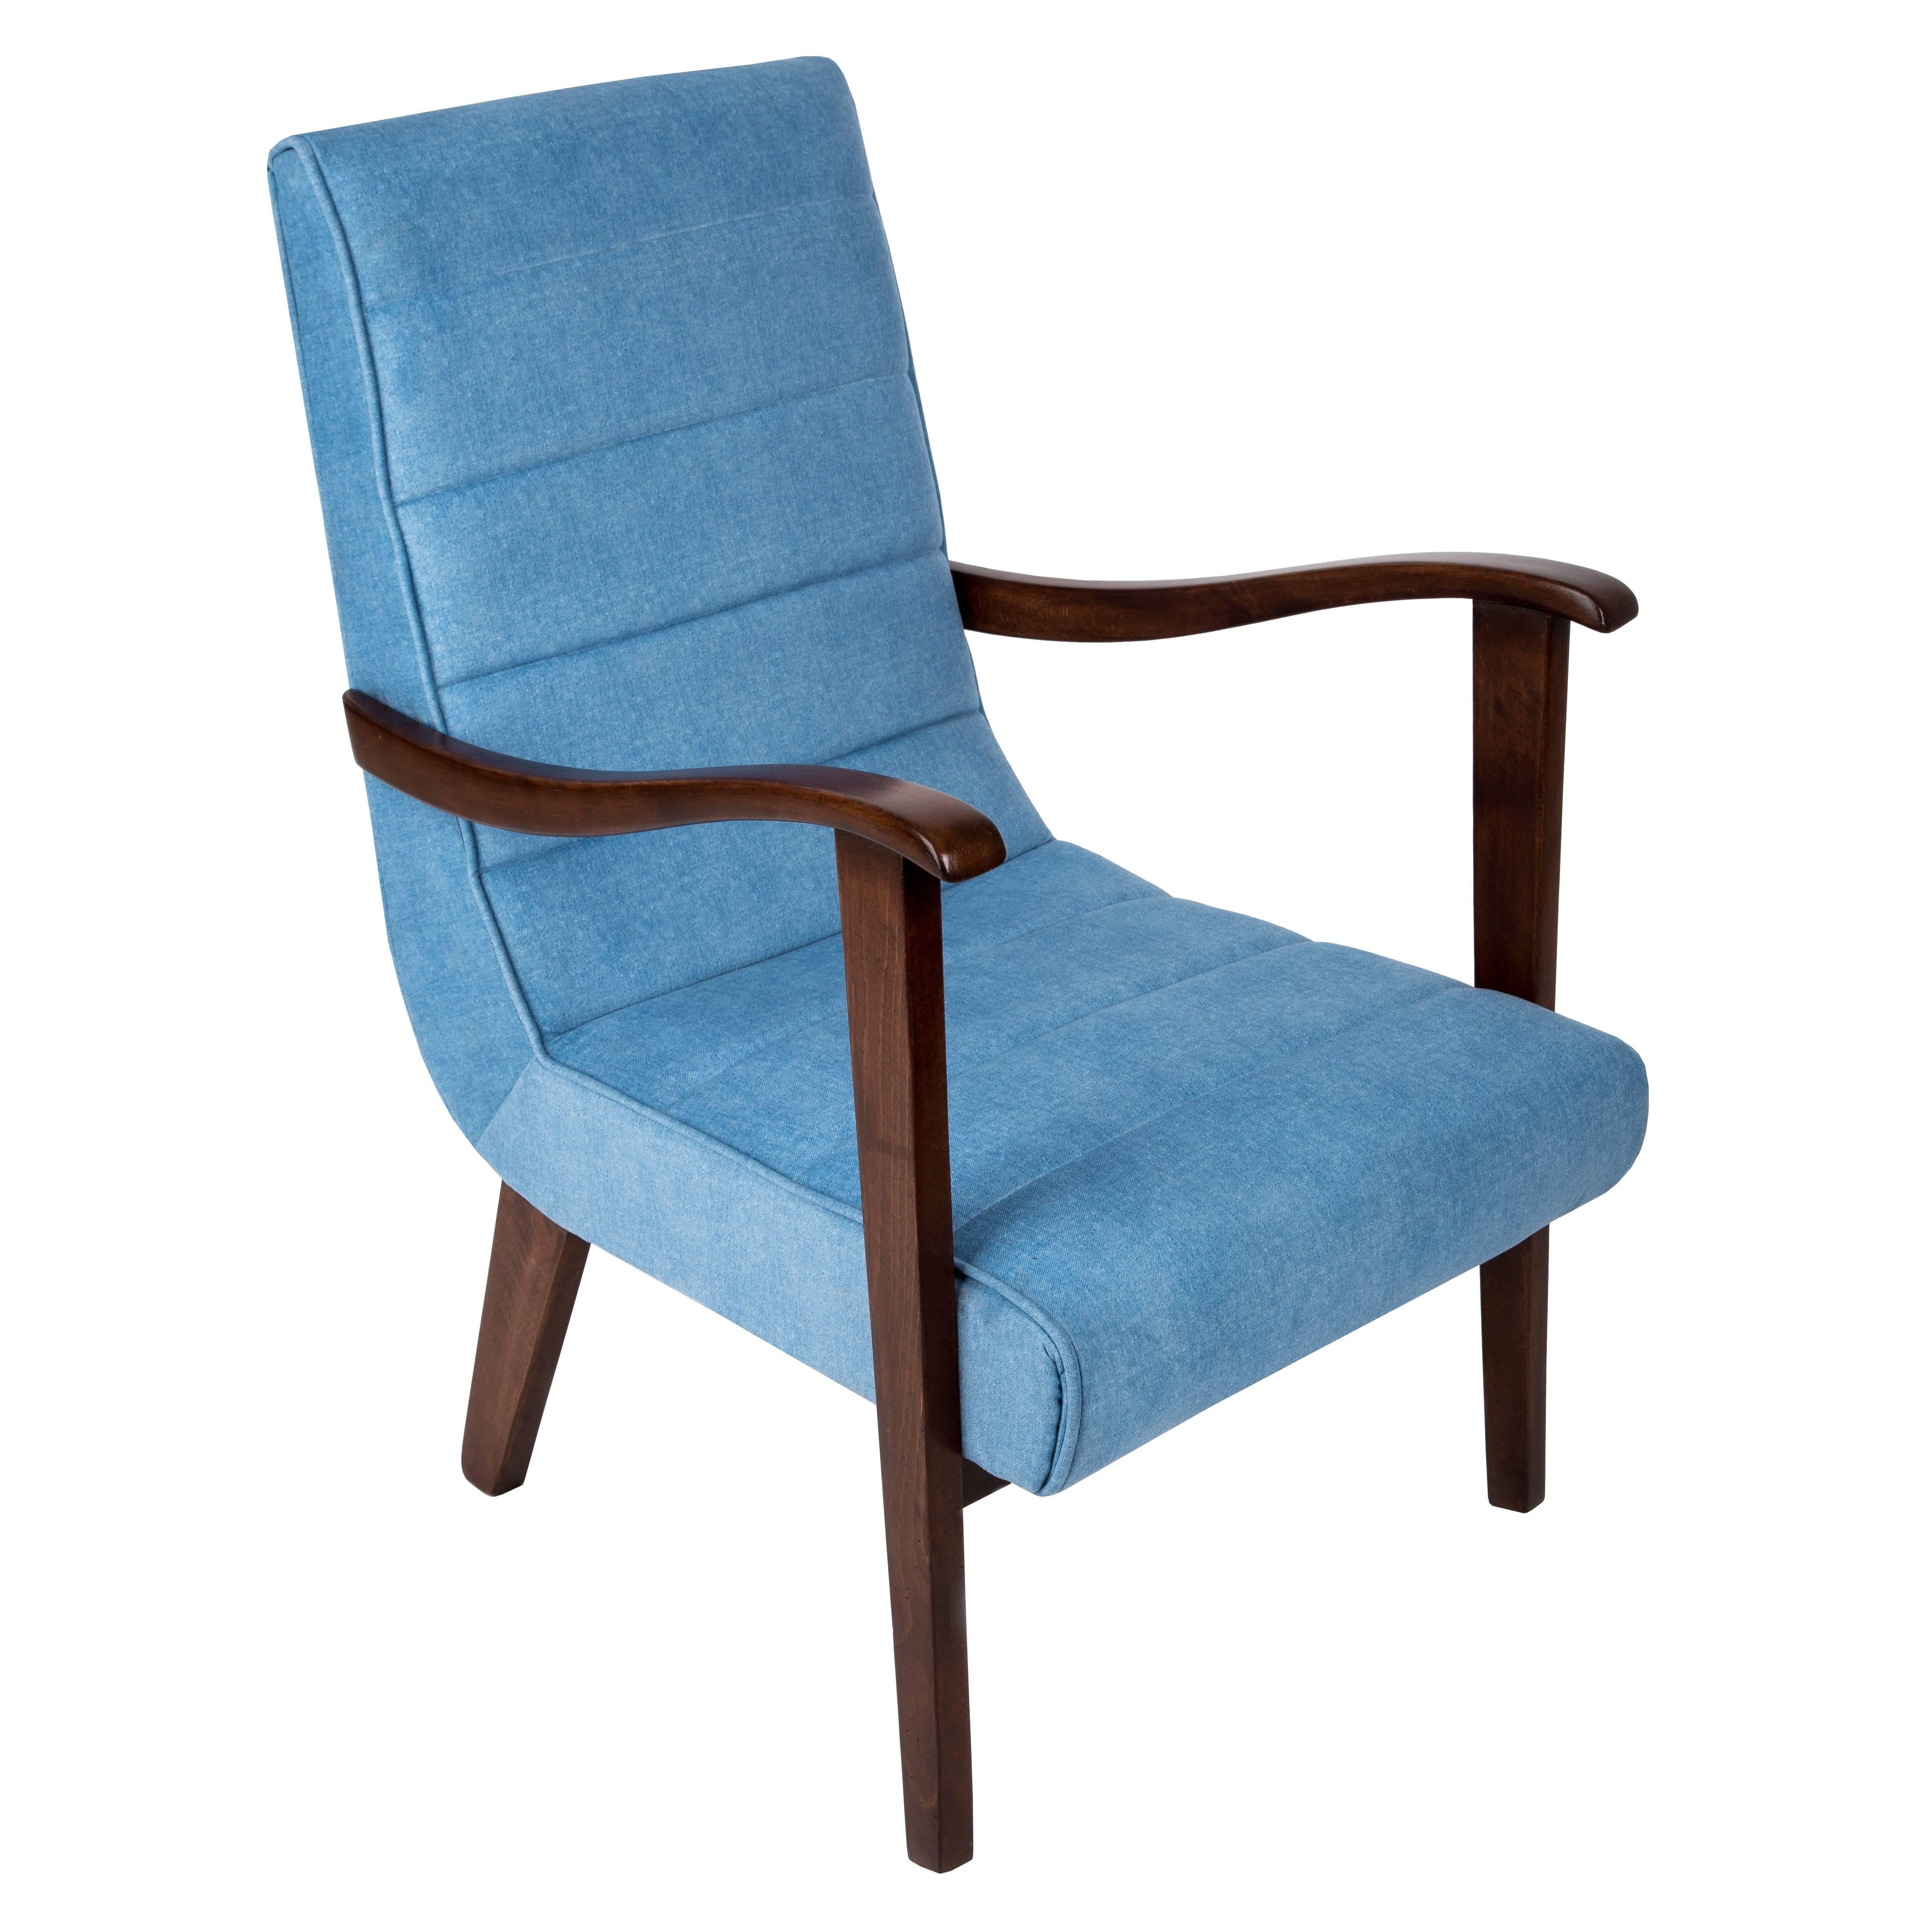 Hand-Crafted Set of Two Mid-Century Modern Blue Armchairs by Prudnik Factory, 1960s, Poland For Sale